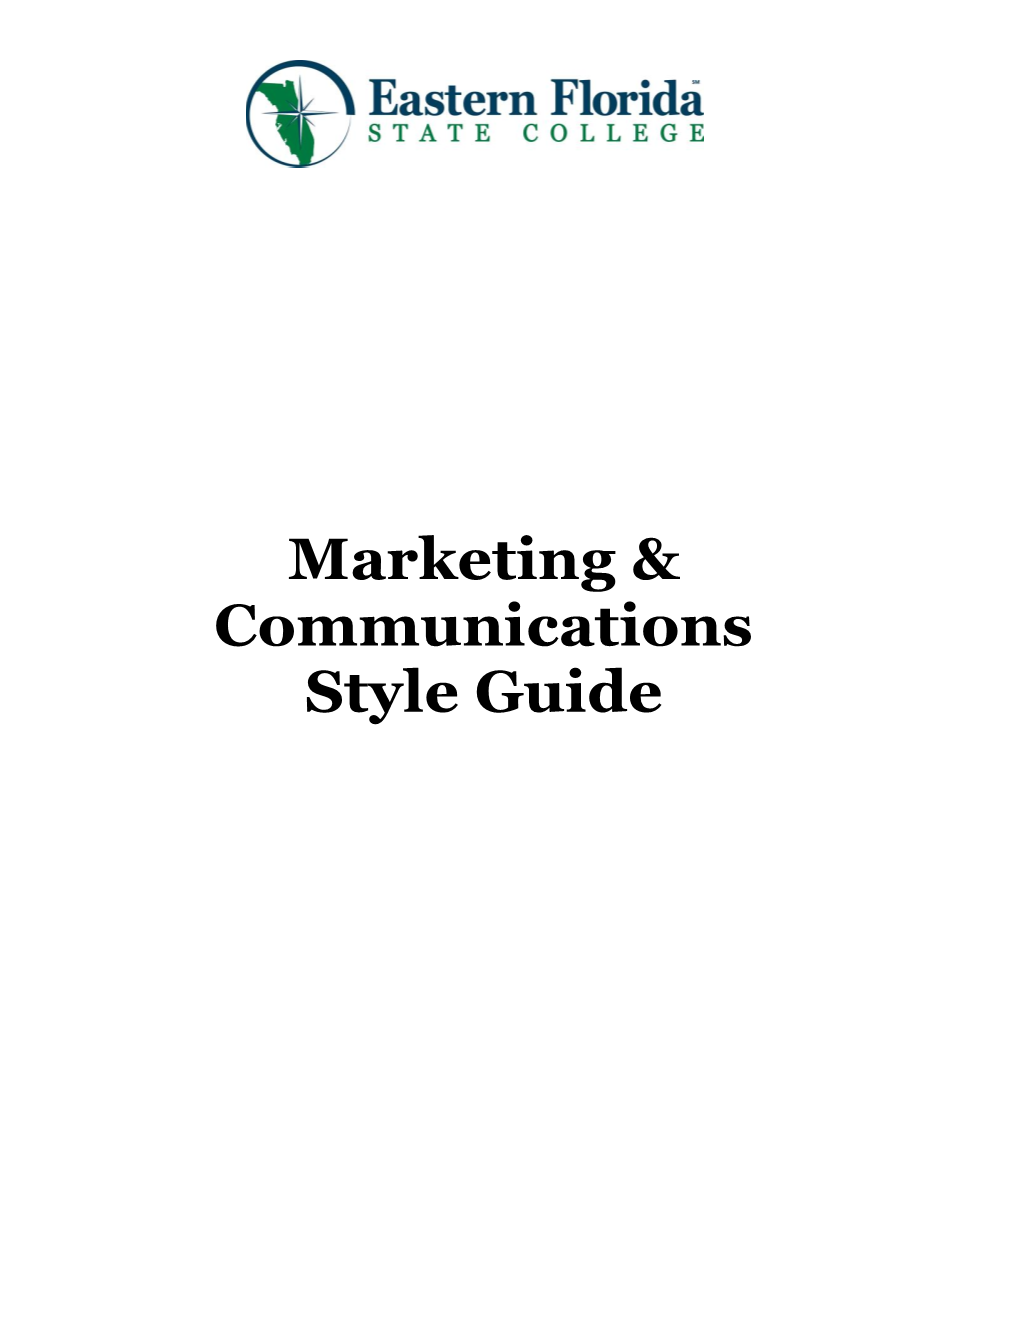 EFSC Marketing & Communications Style Guide